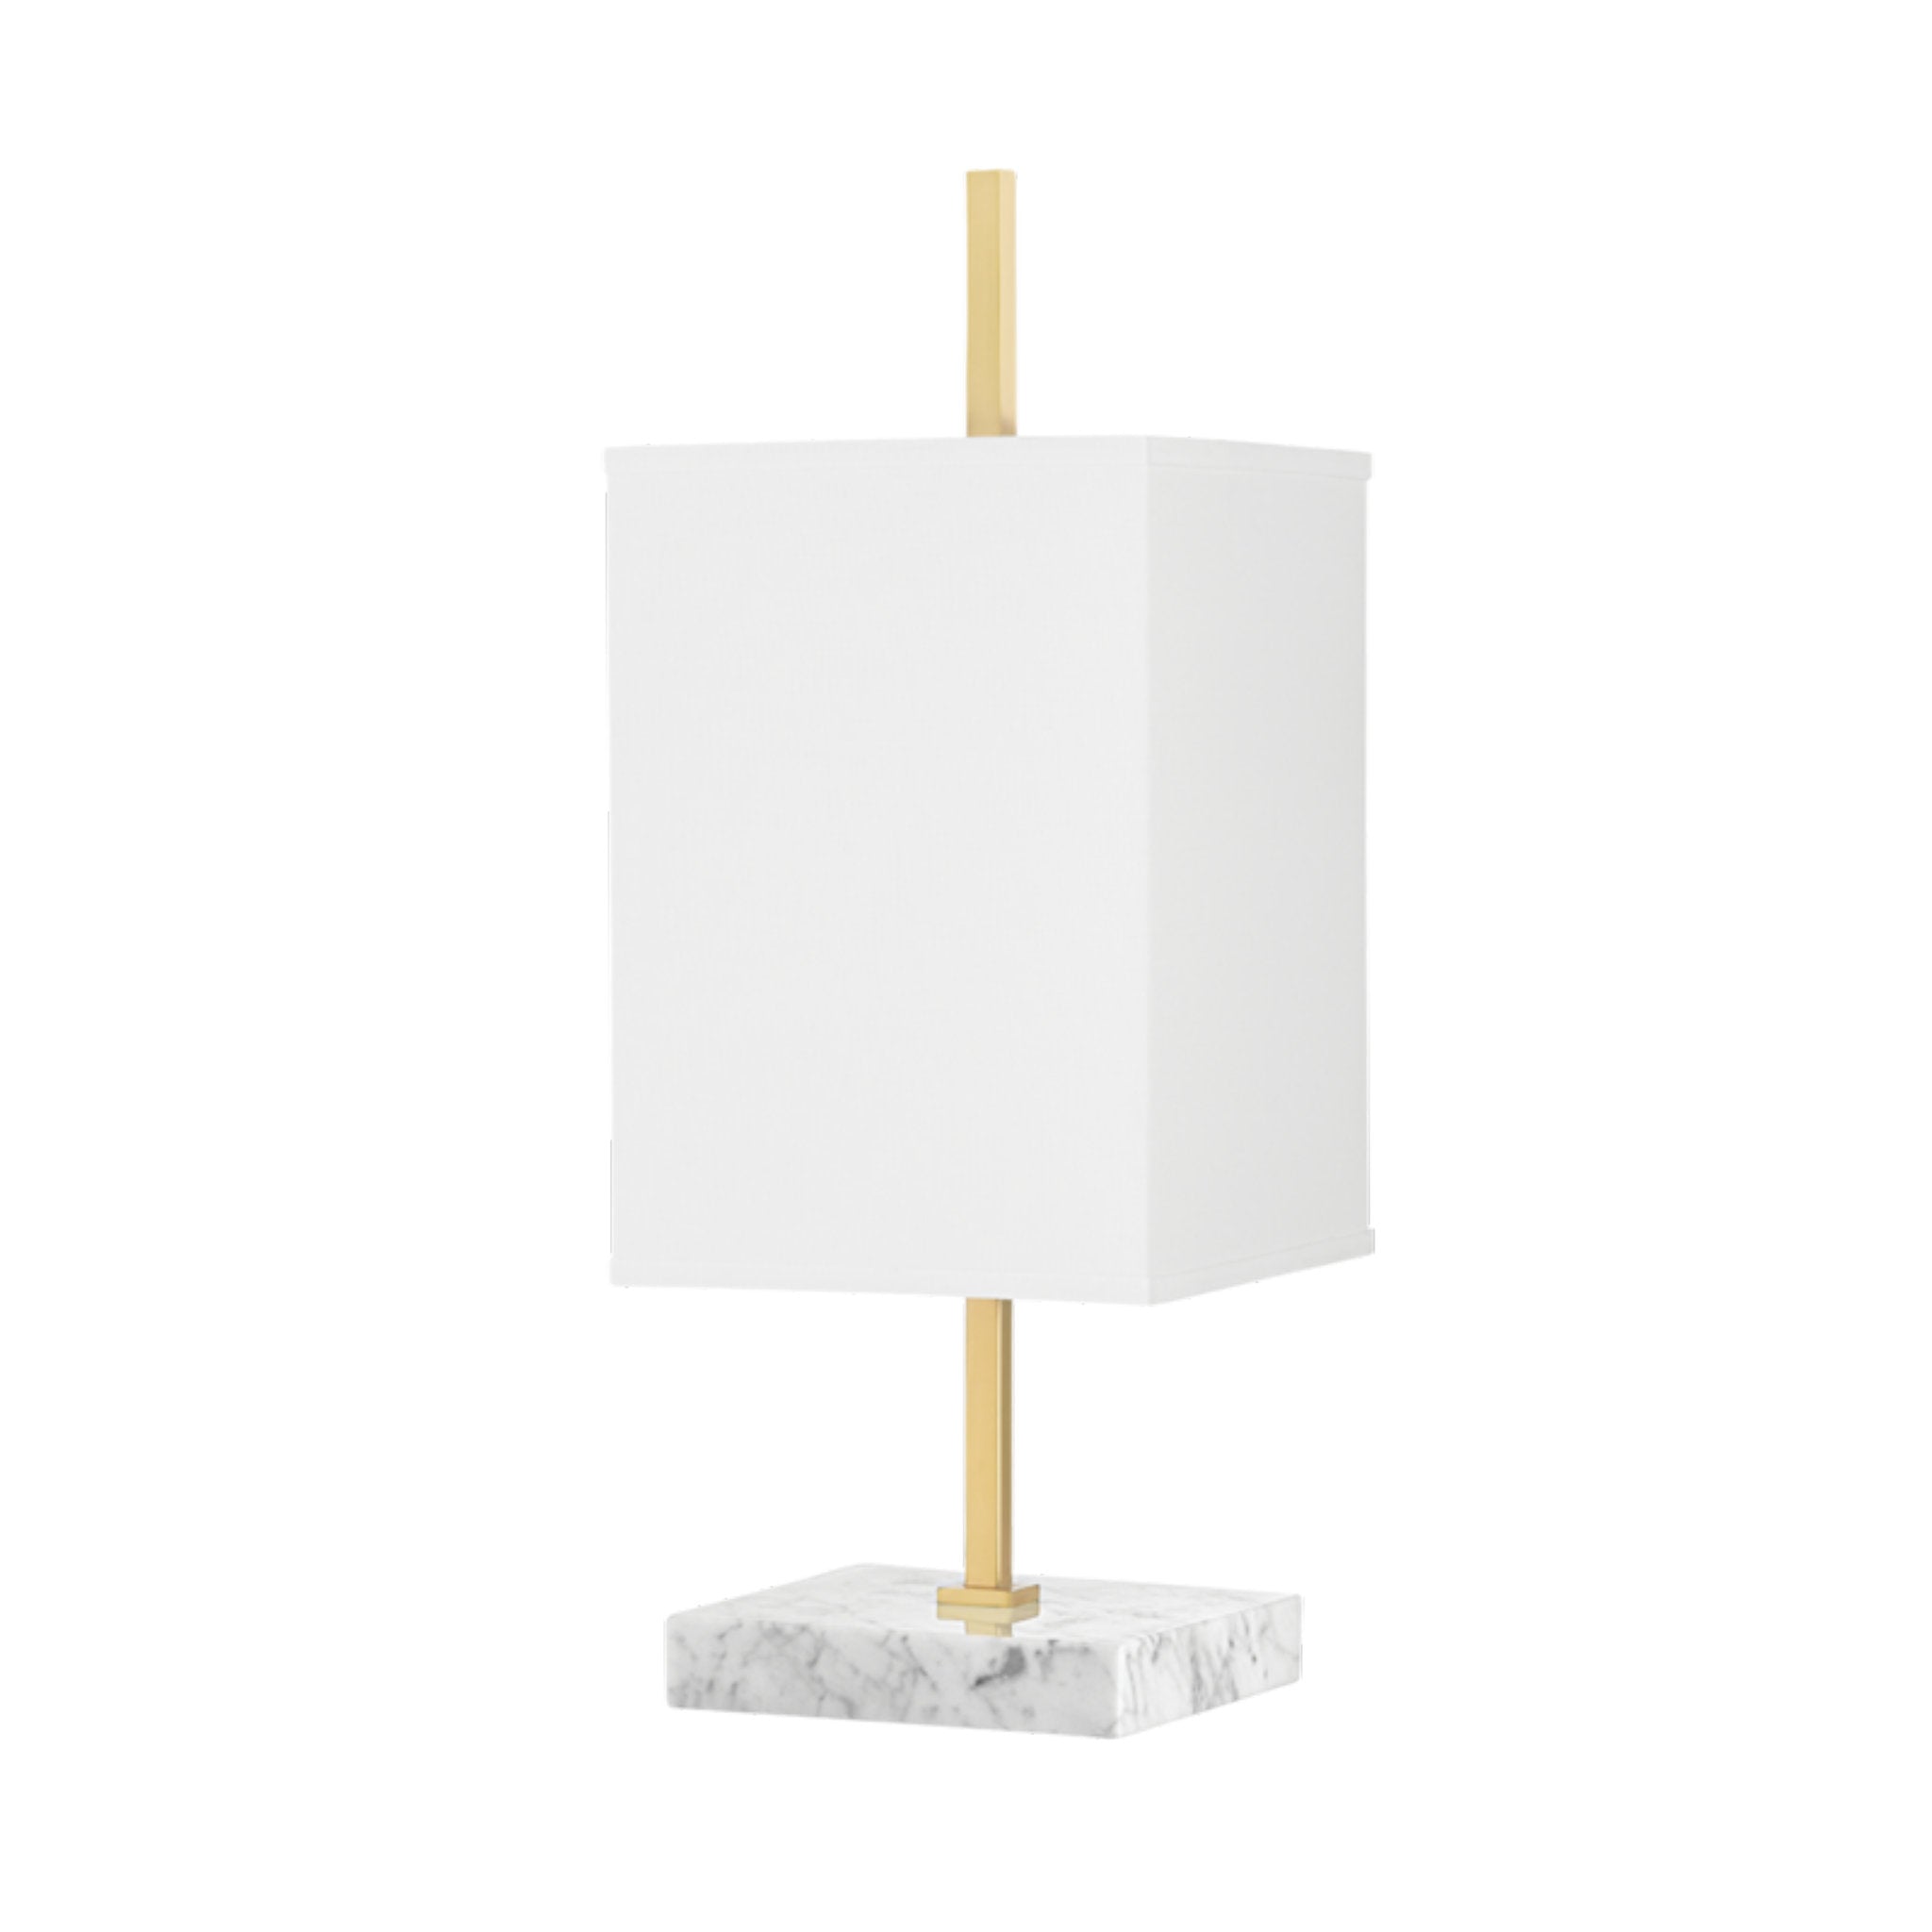 Mikaela 1-Light Table Lamp in Aged Brass